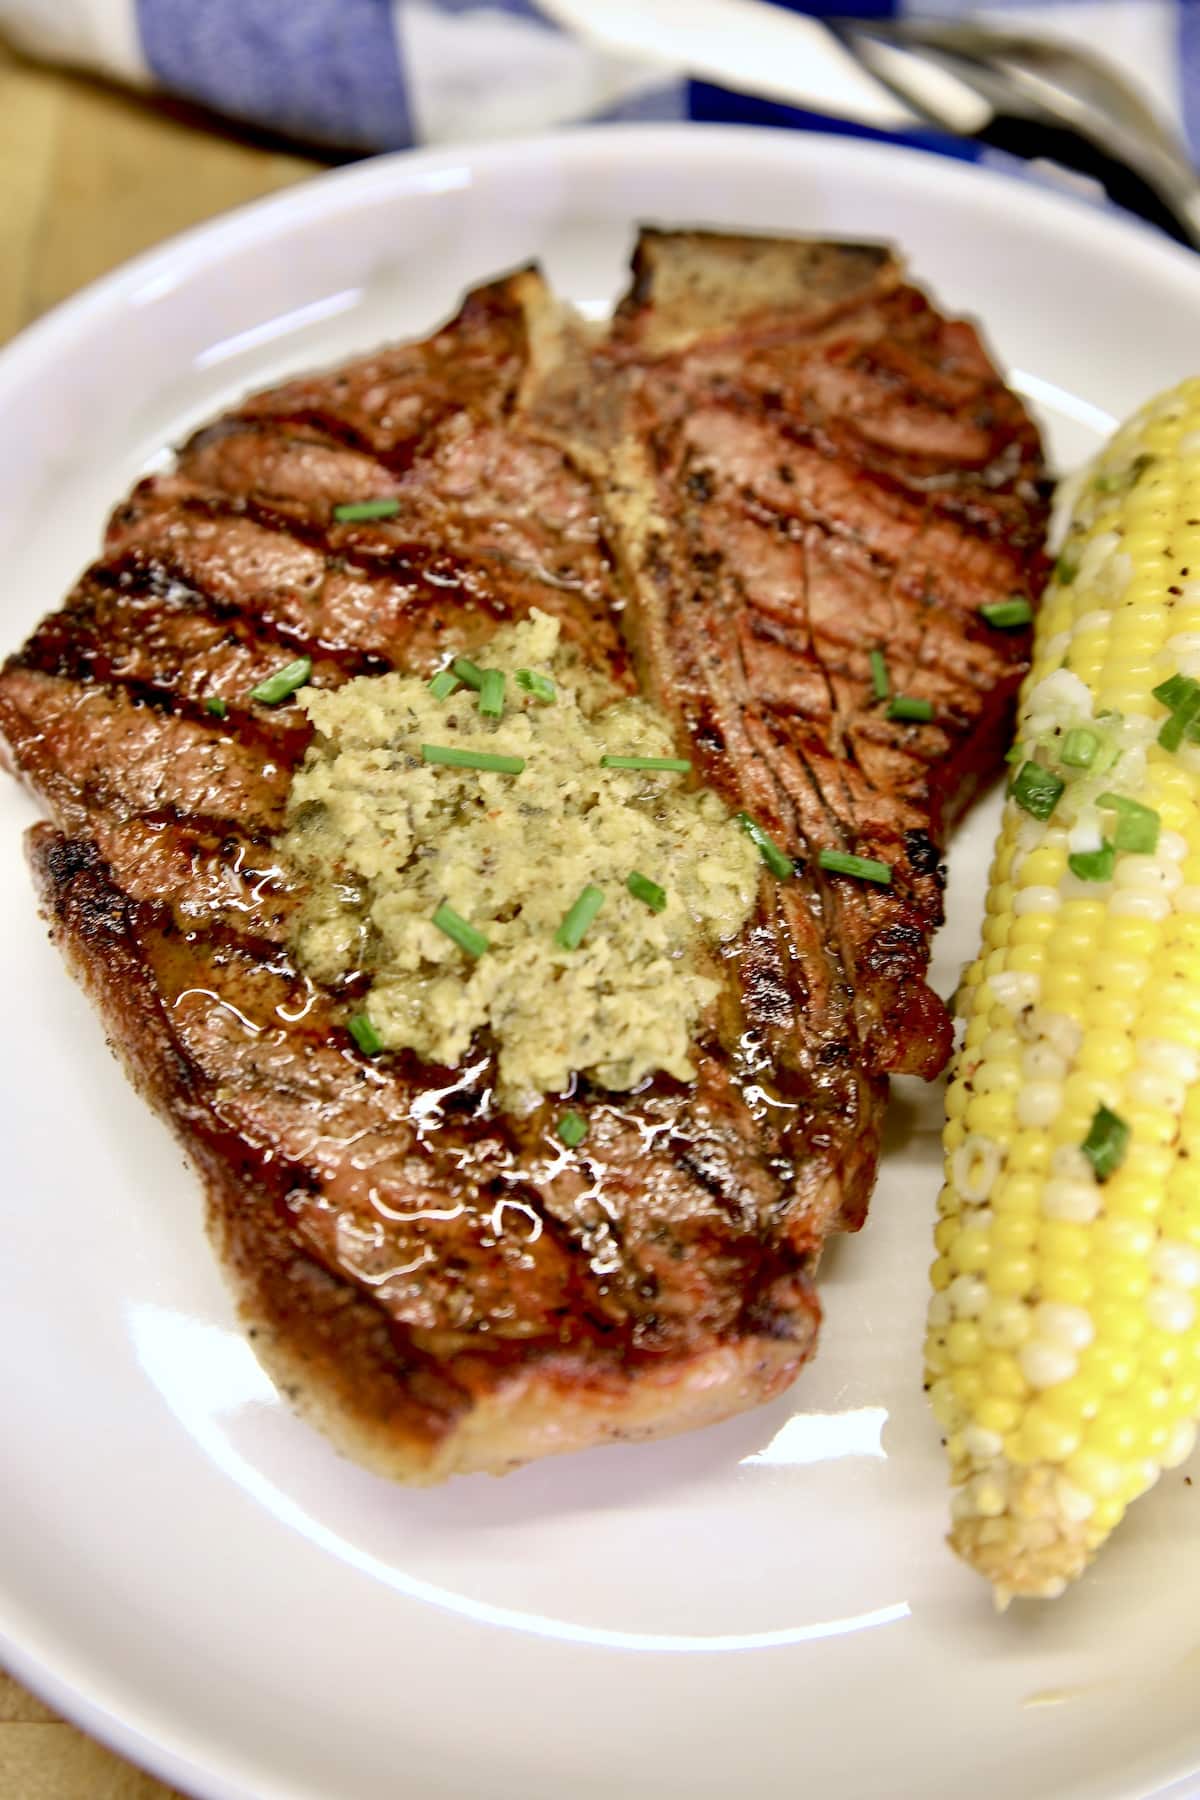 Steak with garlic and herb butter, corn on the cob.